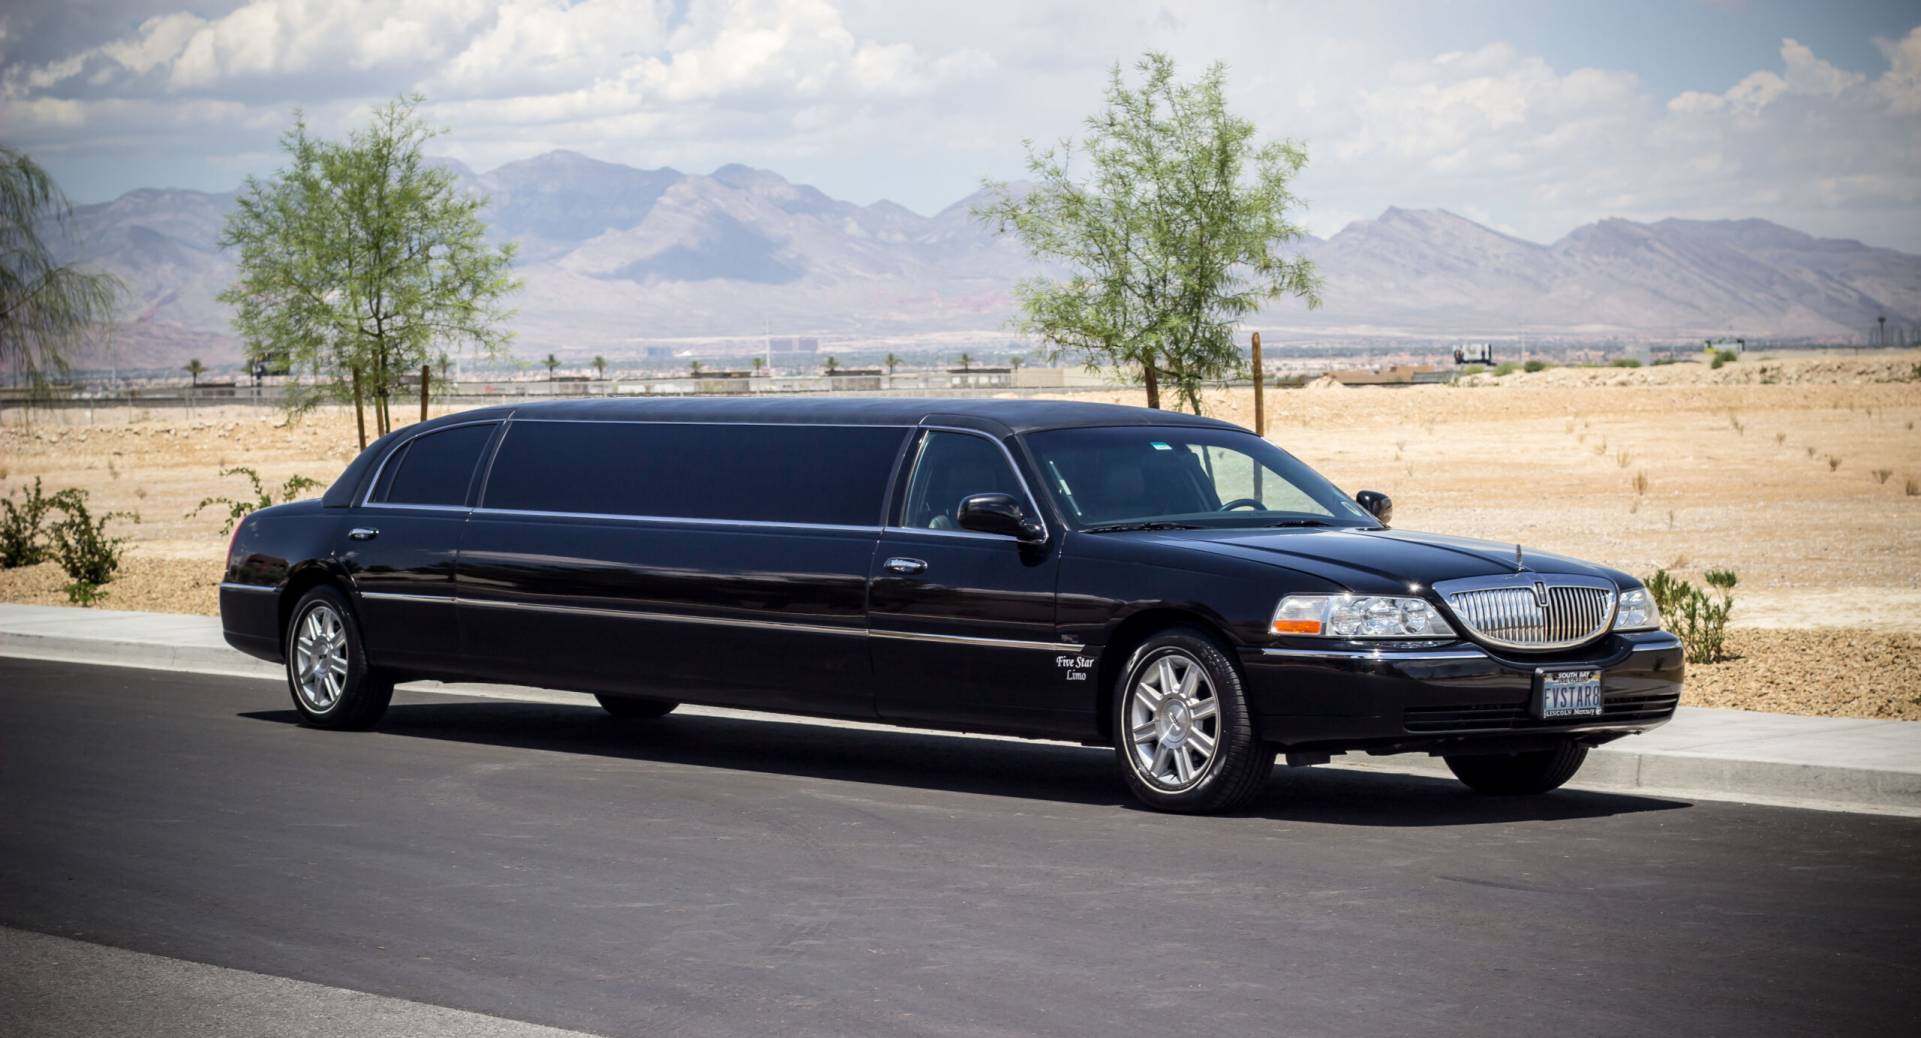 Limo Service Rocks with The right Environment